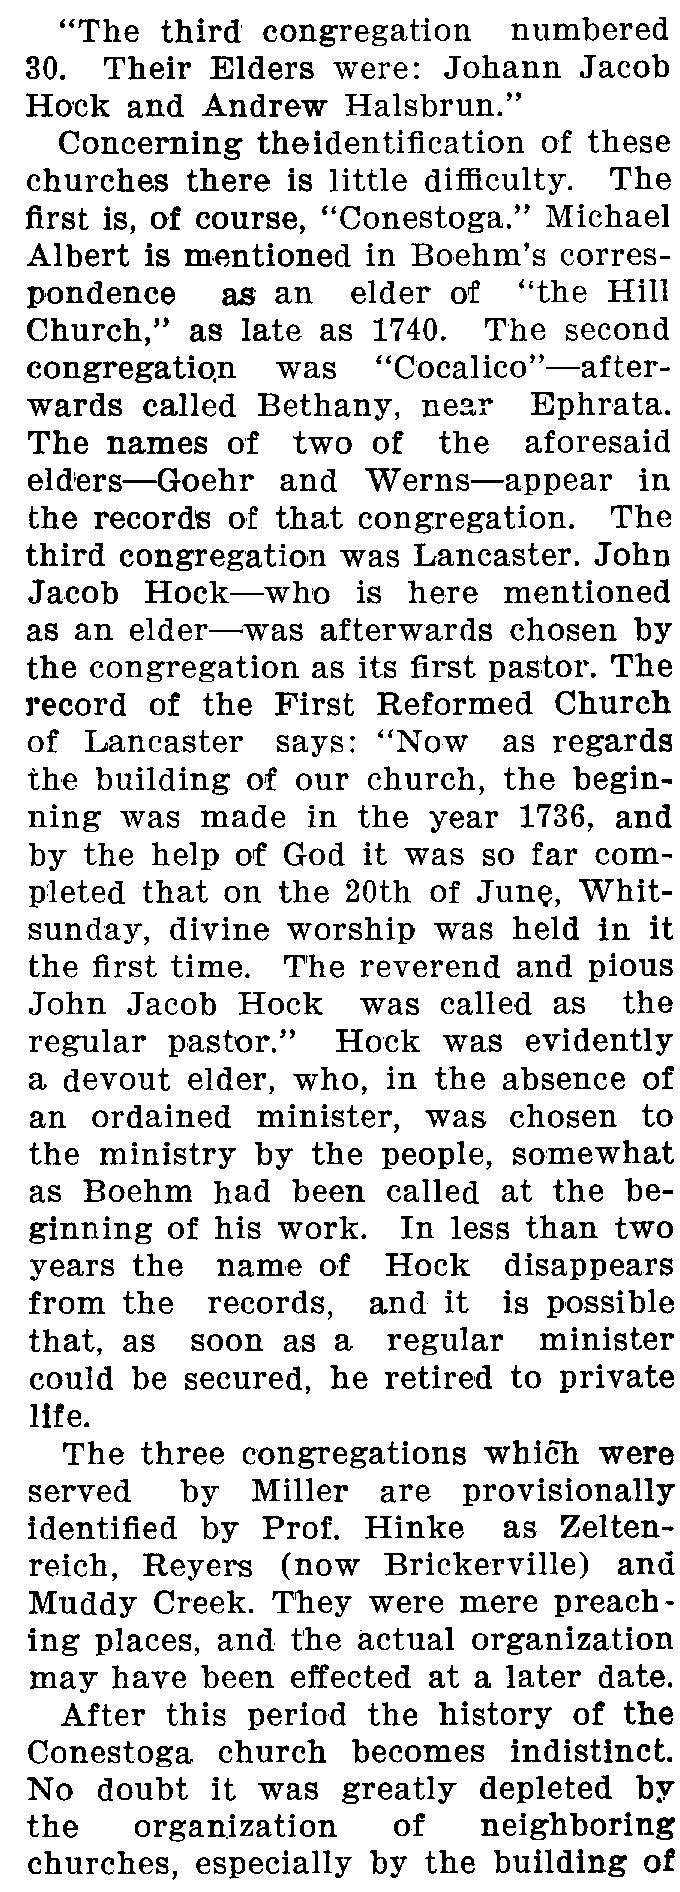 "The third congregation numbered 30. Their Elders were: Johann Jacob Hock and Andrew Halsbrun." Concerning theidentification of these churches there is little difficulty.